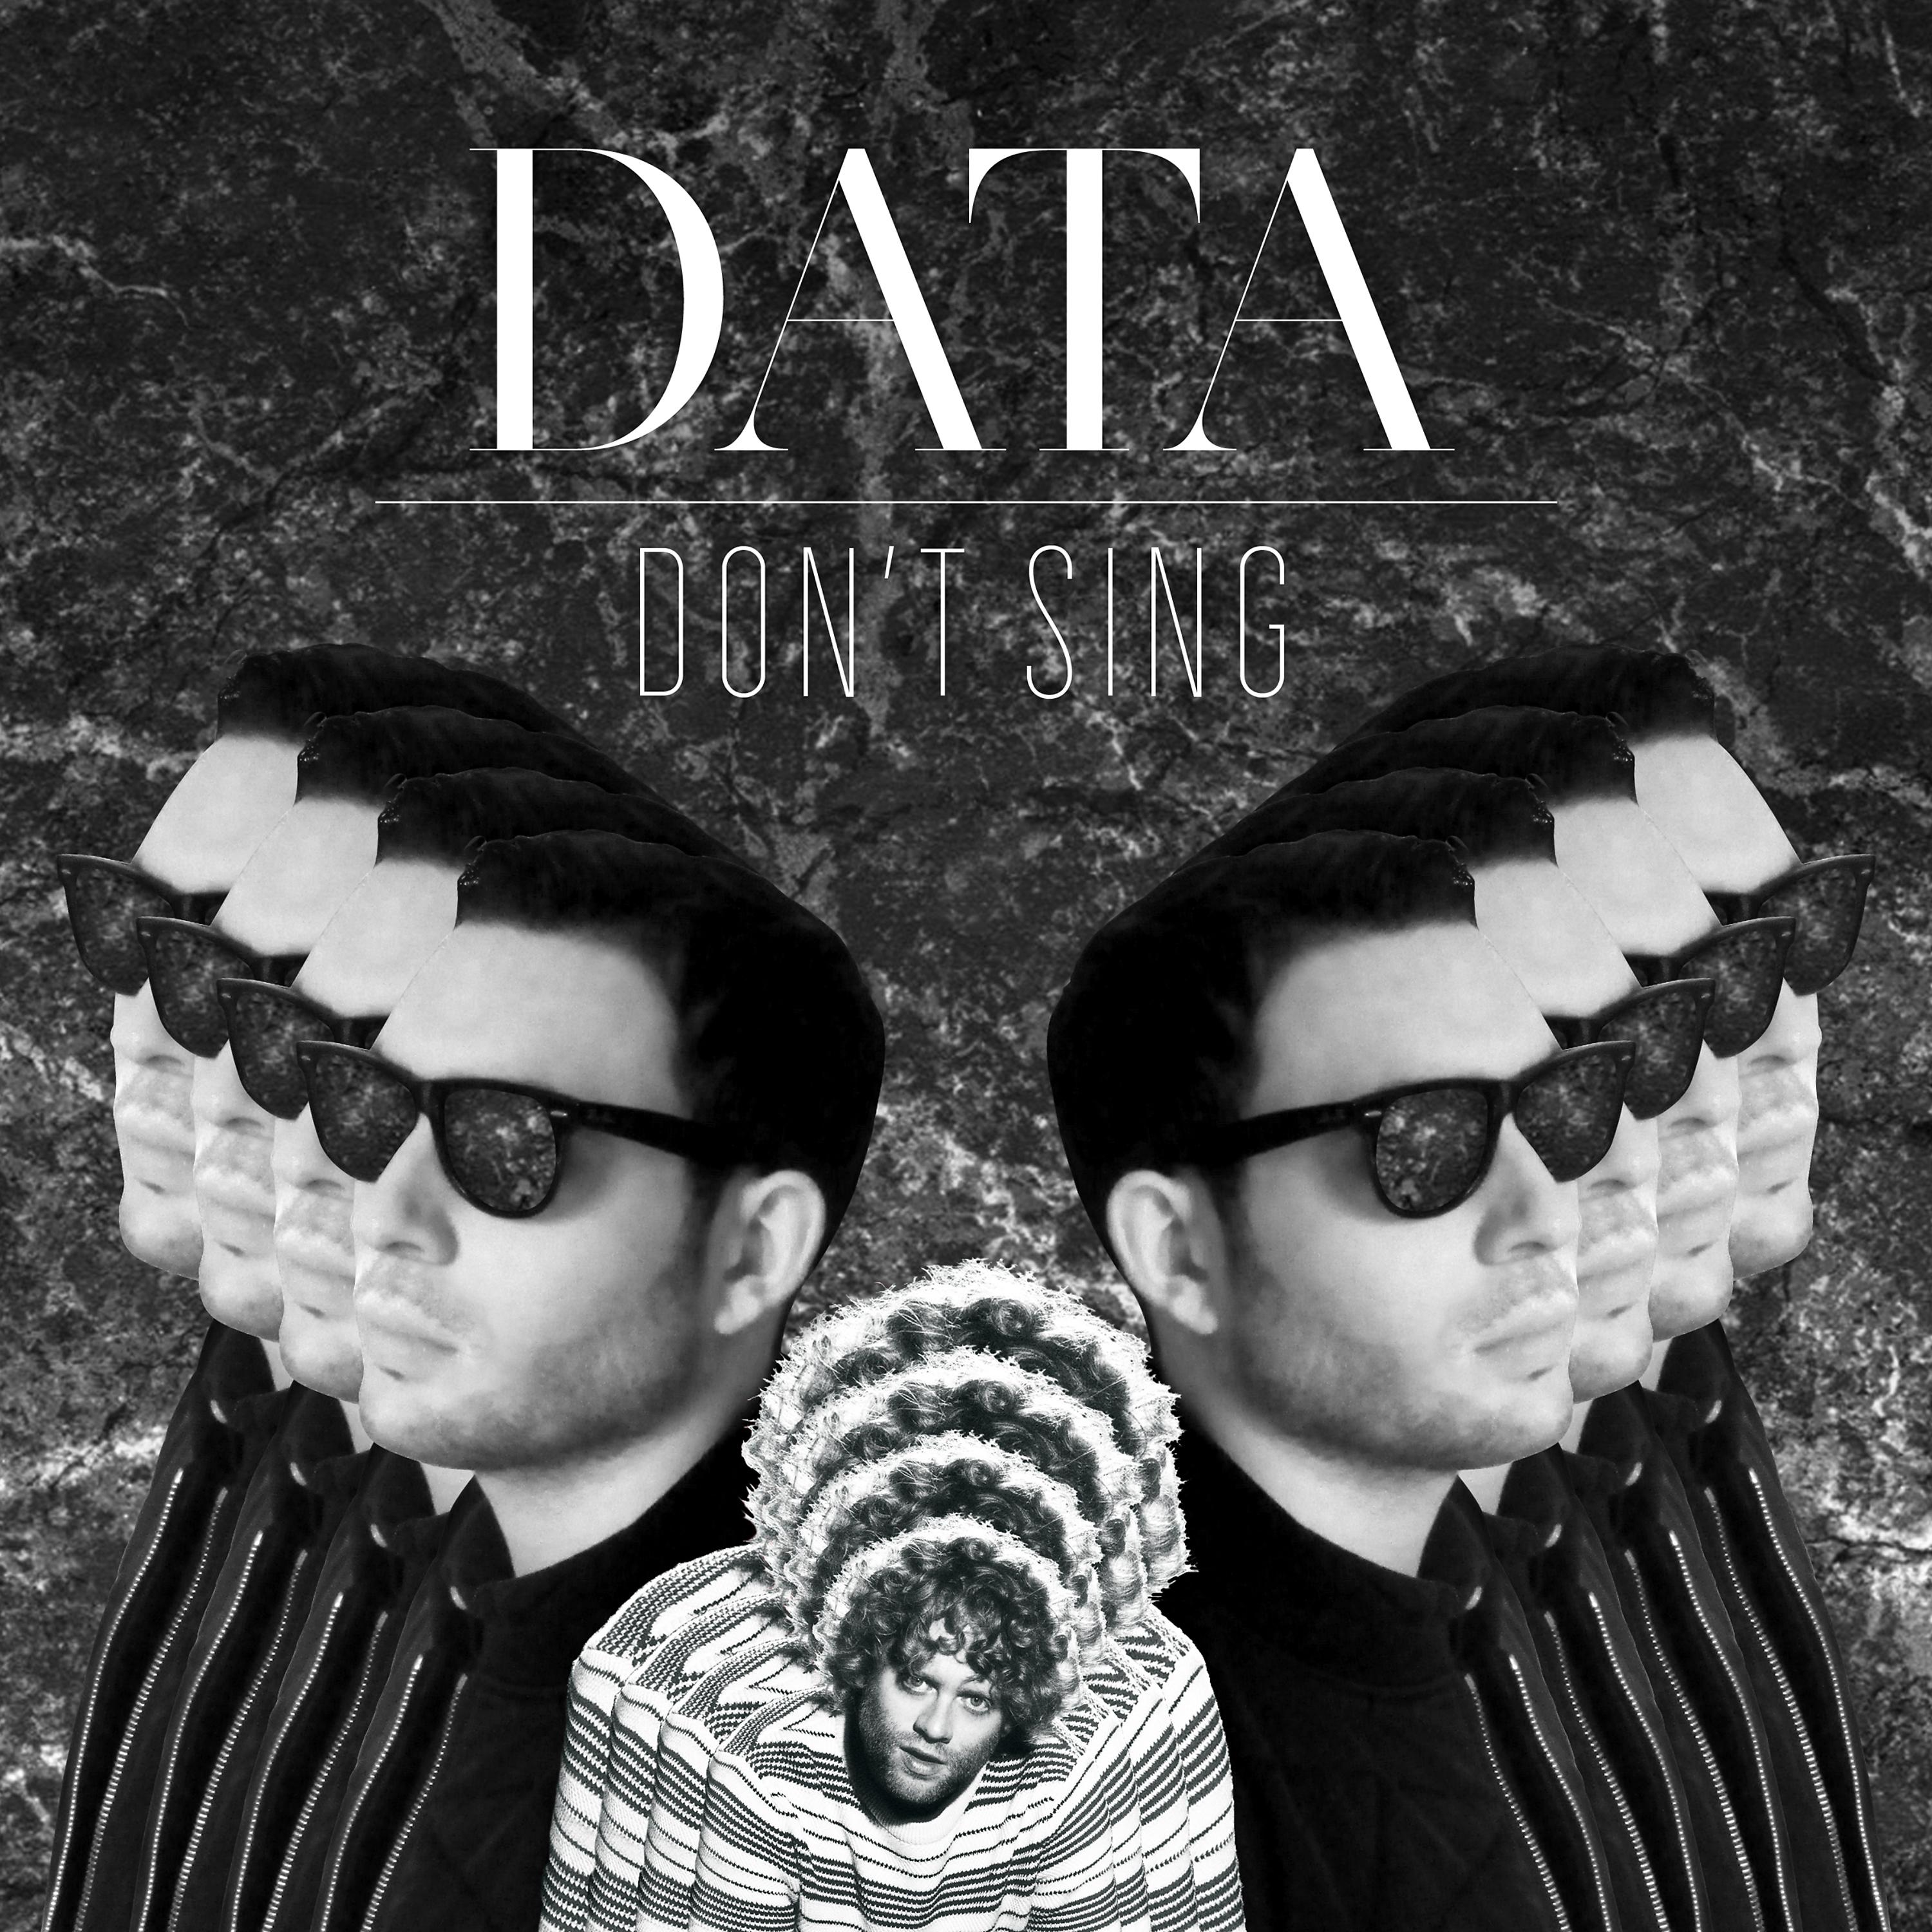 Dont feat. Dont Sing (feat. Benny Sings) год выпуска.